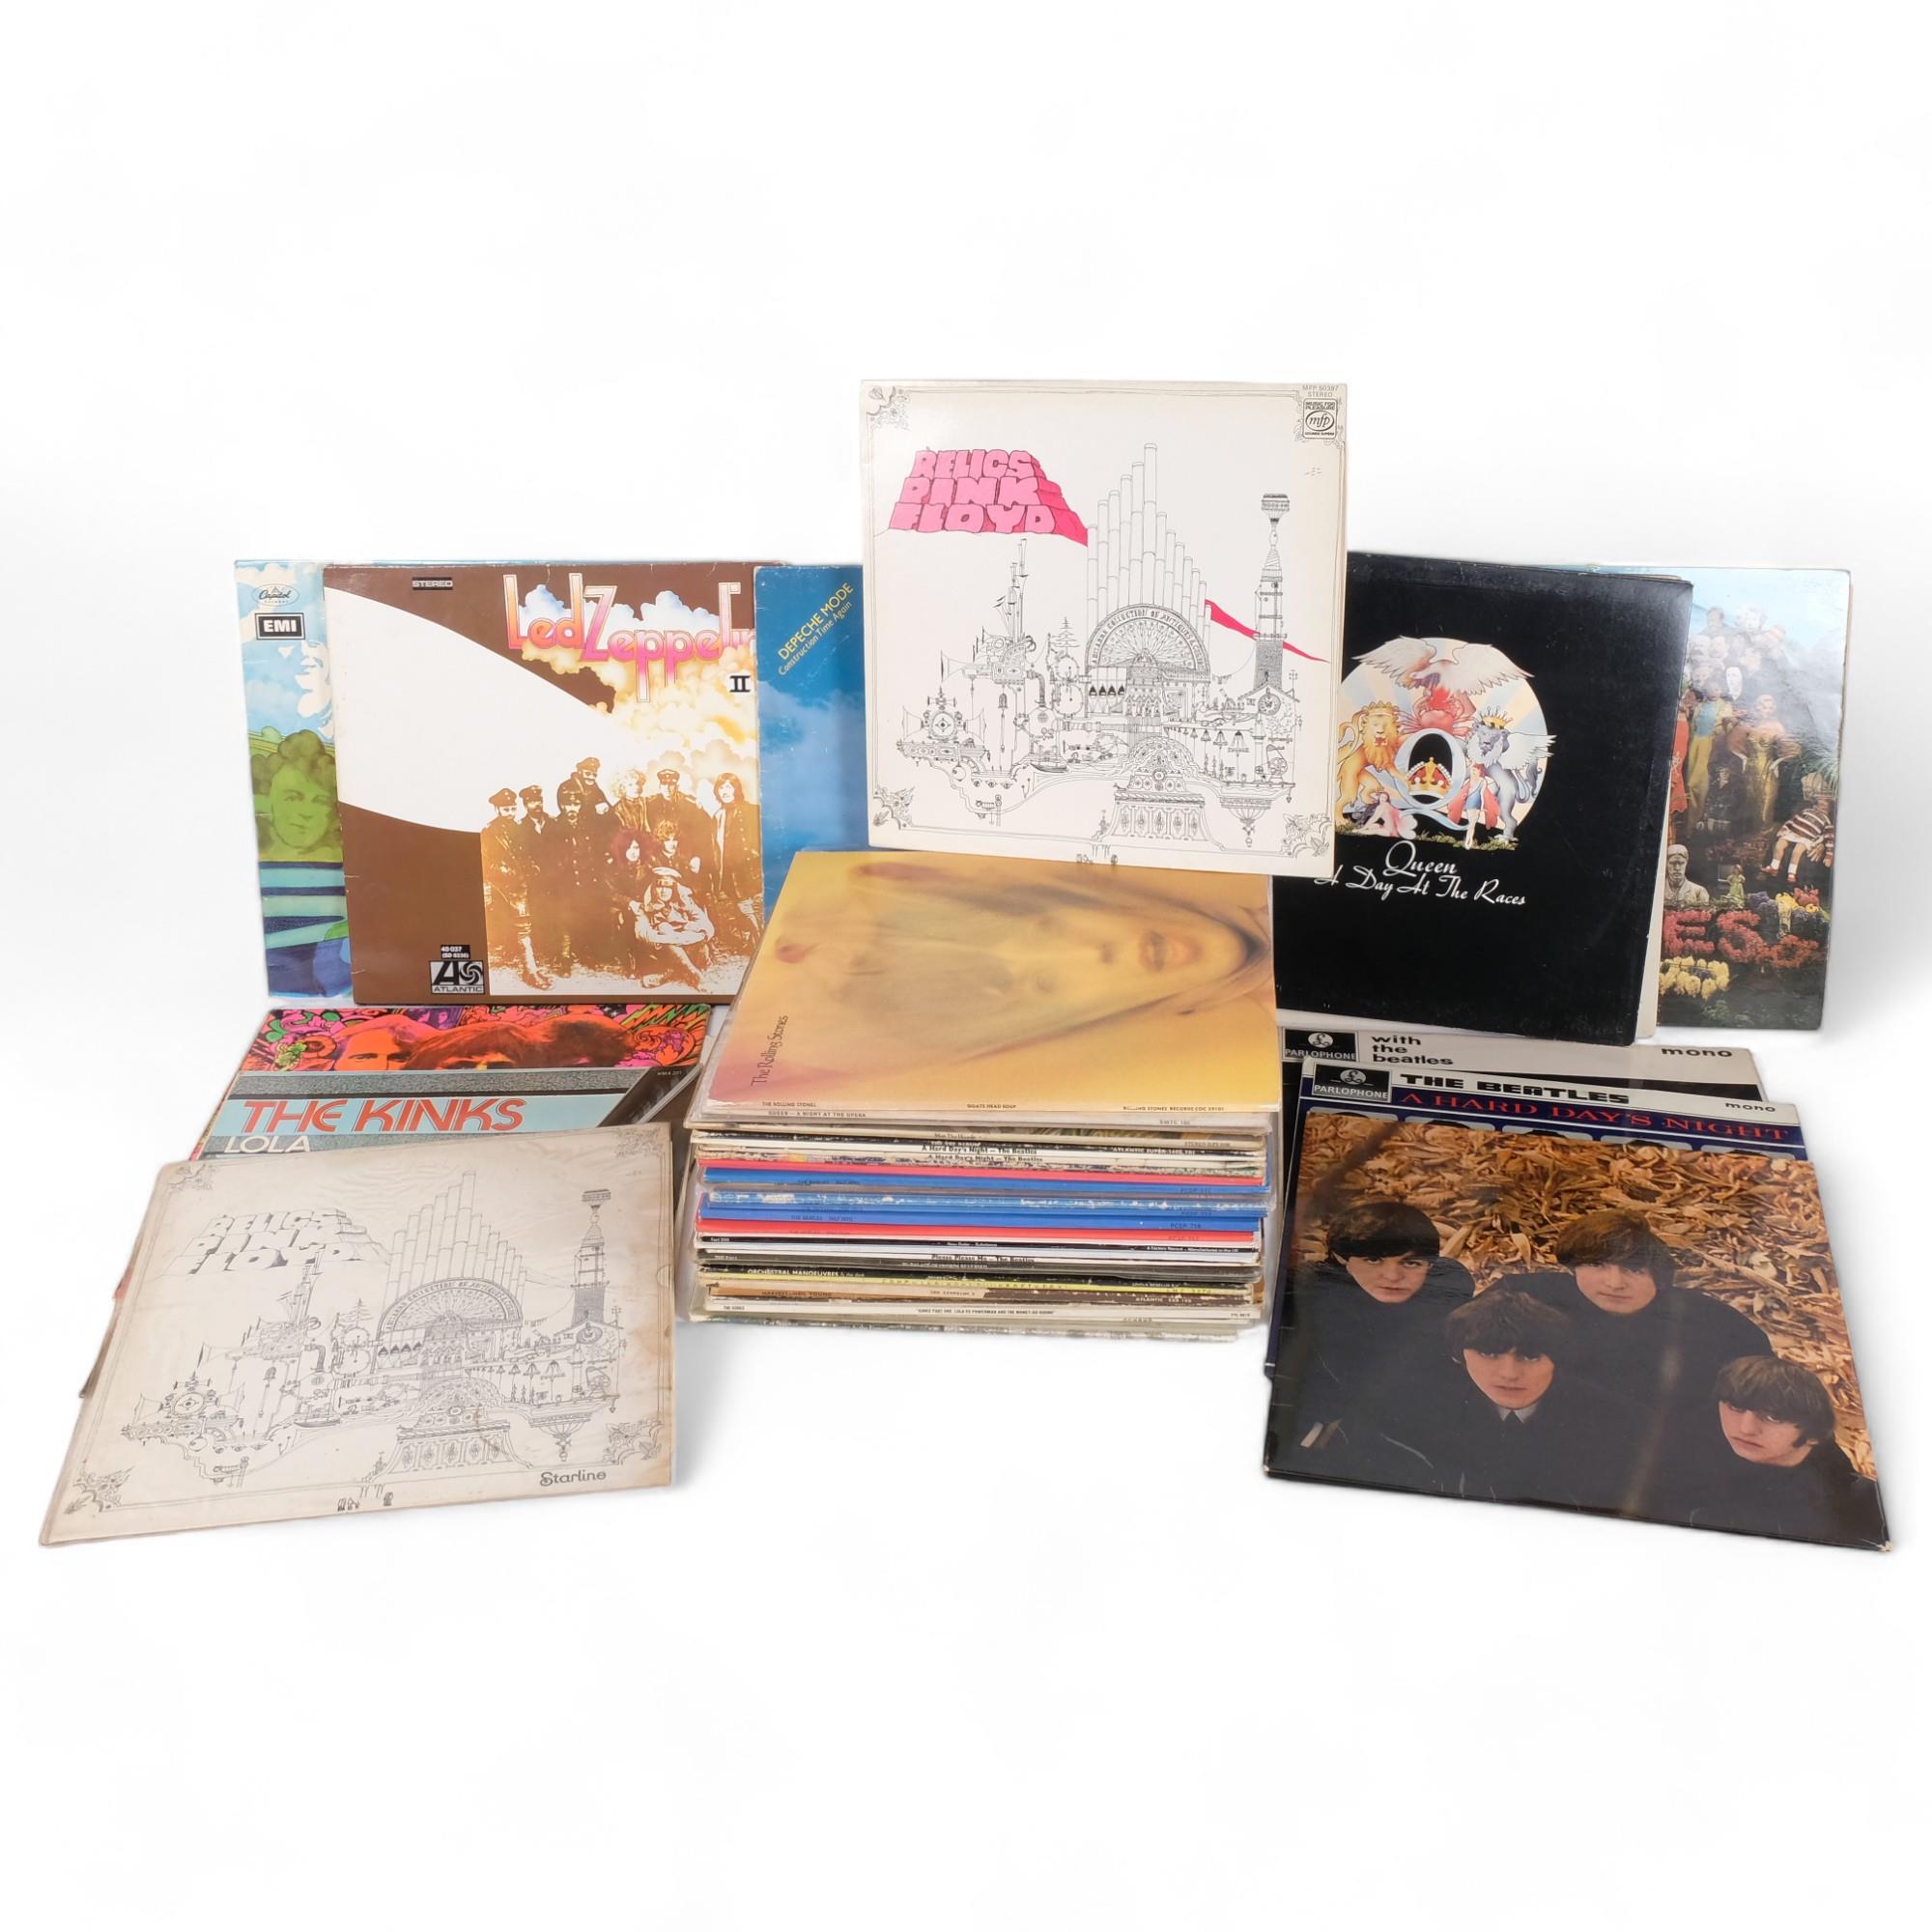 A quantity of vinyl LPs, including various artists such as Pink Floyd, Cream, Led Zeppelin, The